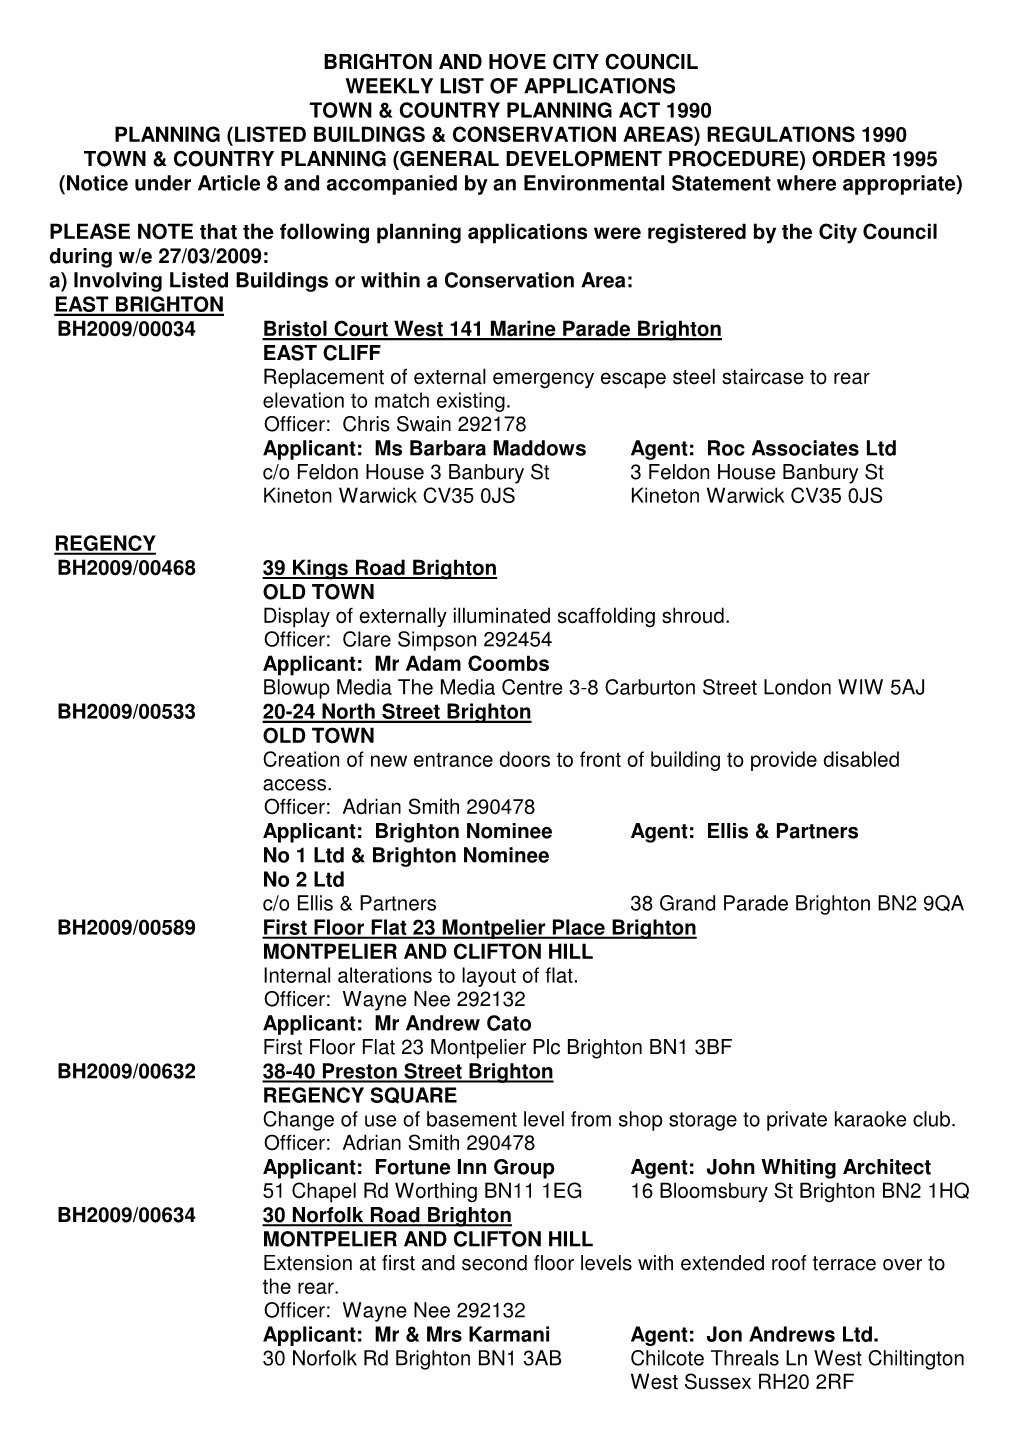 Brighton and Hove City Council Weekly List Of